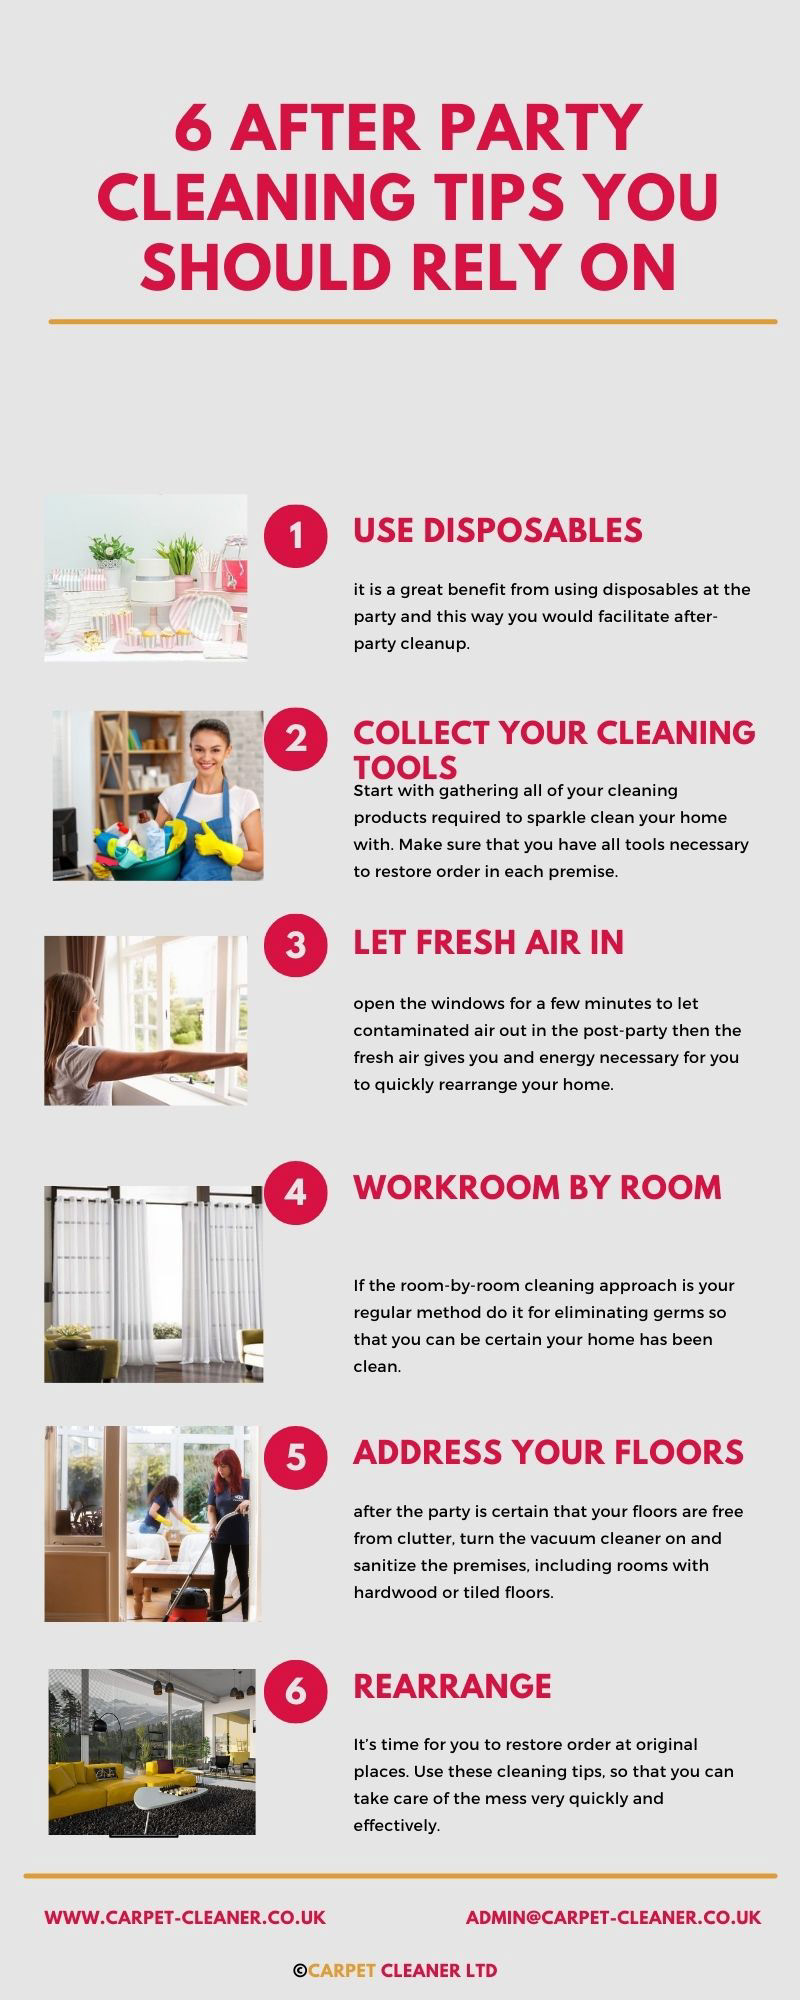 After Party Cleaning Tips cleaning tips